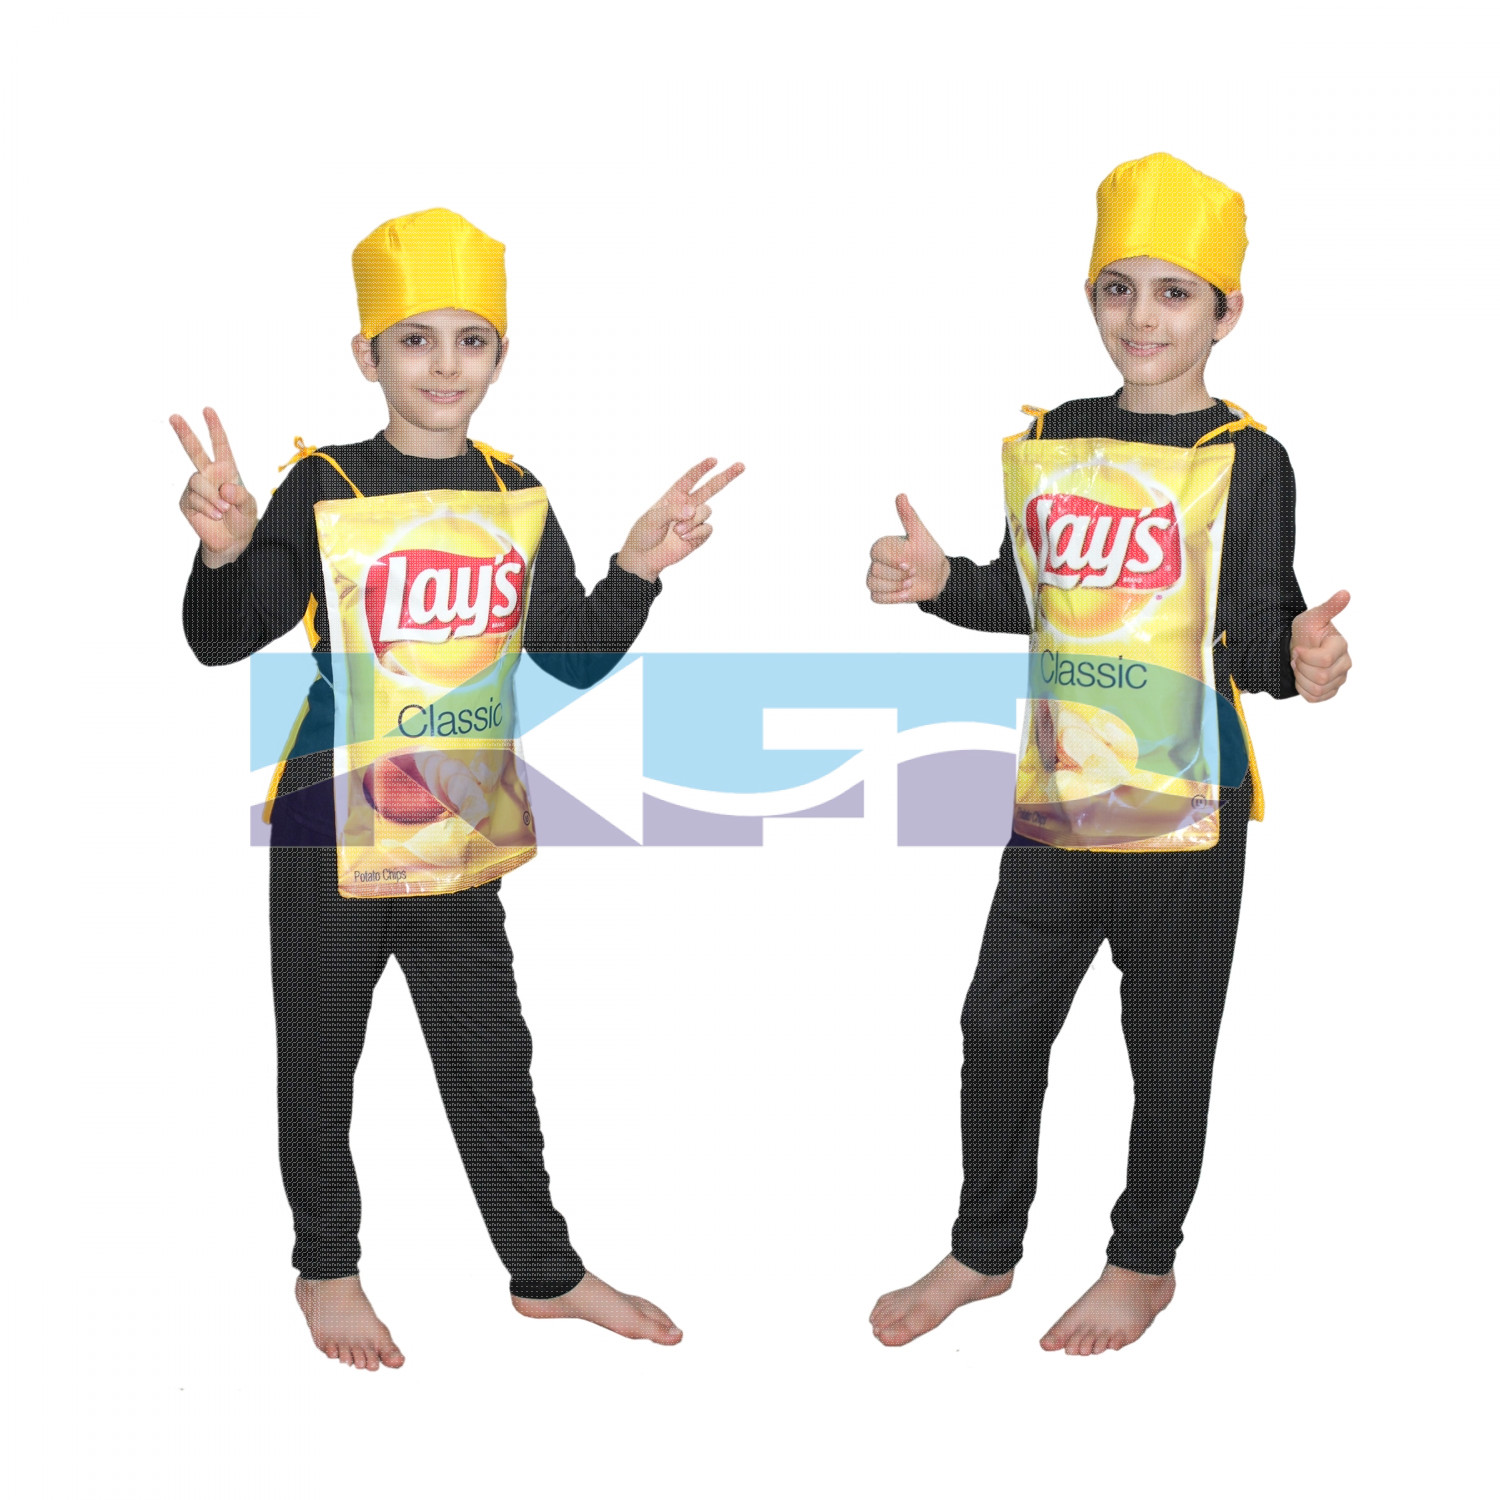 Lays fancy dress for kids,Object Costume for School Annual function/Theme Party/Competition/Stage Shows Dress